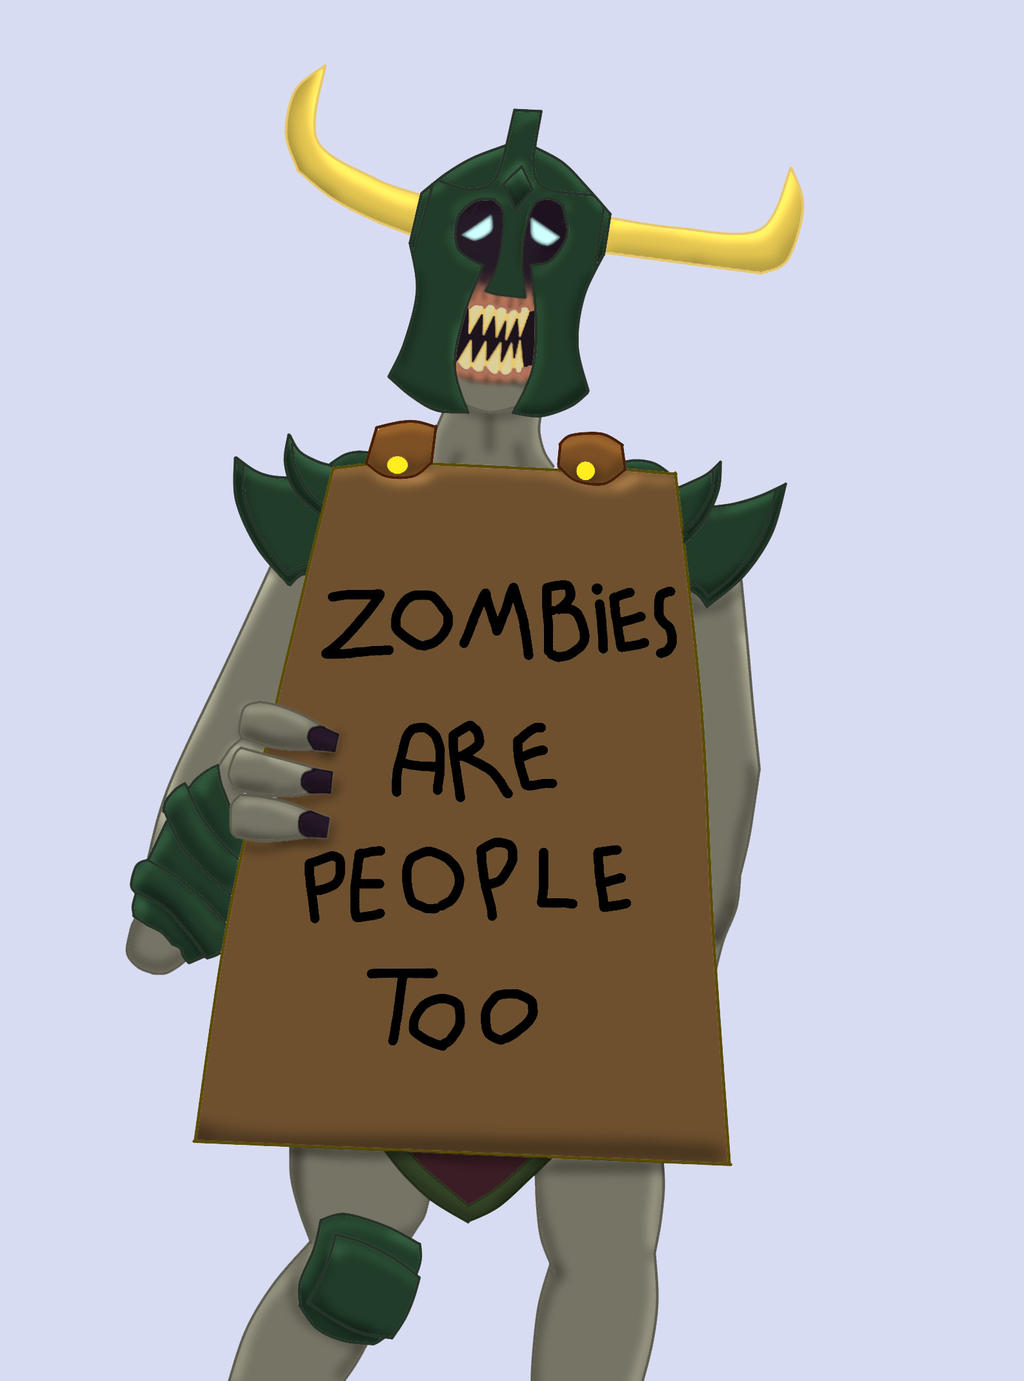 Zombies are People too